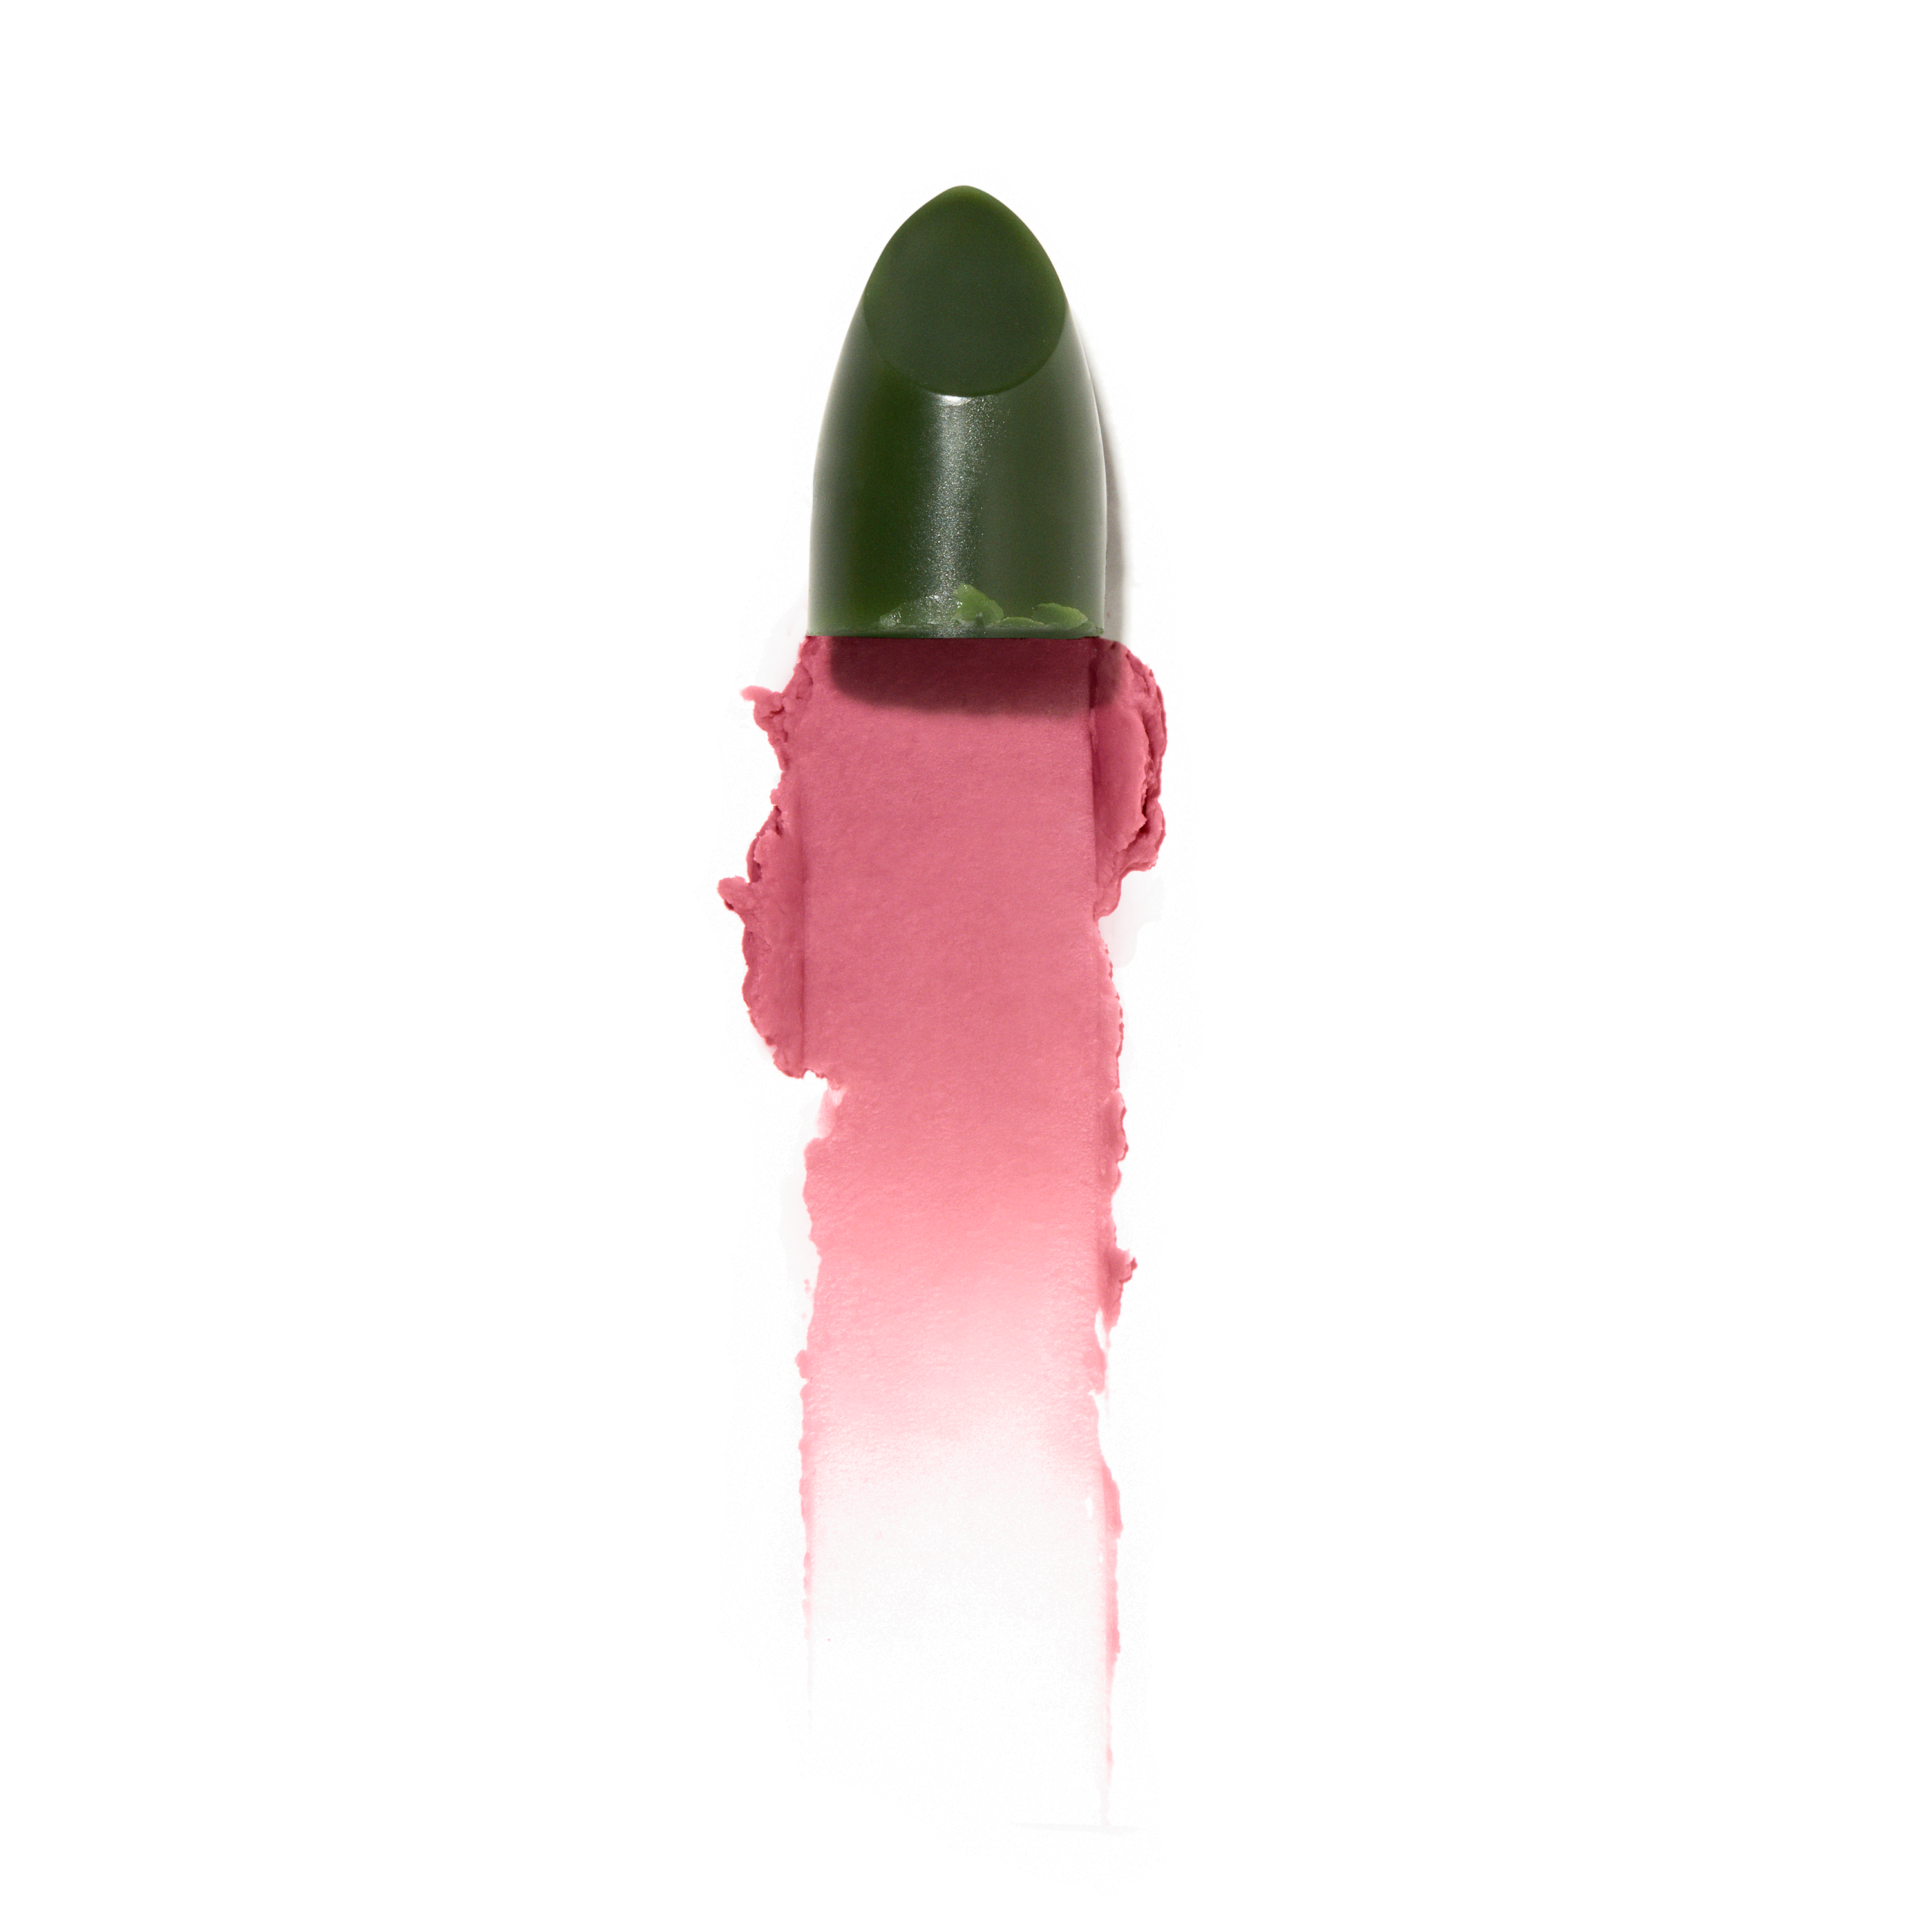 Lipstick Queen Shade Shifter, Frog Prince Lipstick - image 2 of 8